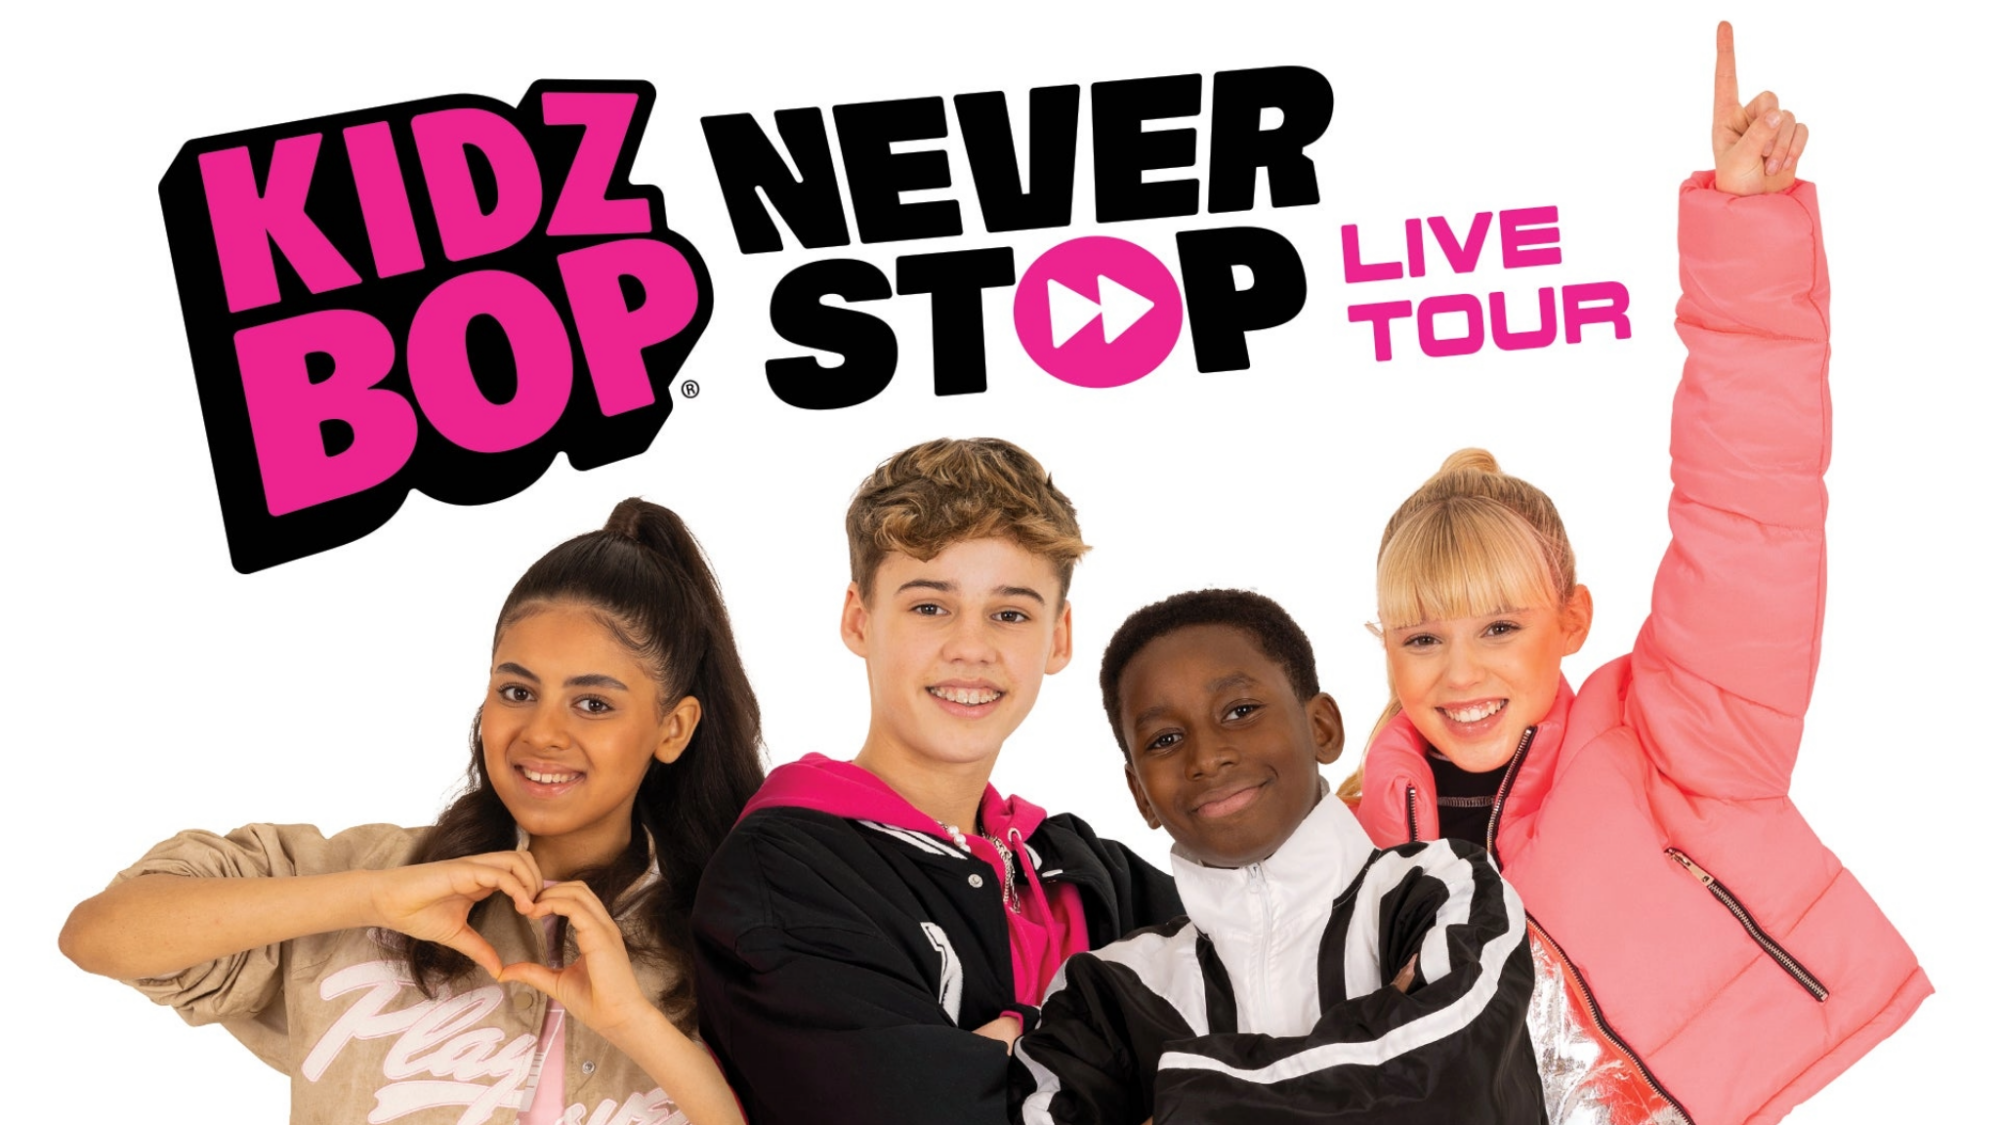 Image name KIDZ BOP Never Stop Live Tour at Sheffield City Hall Oval Hall Sheffield the 35 image from the post KIDZ BOP NEVER STOP TOUR at York Barbican, York in Yorkshire.com.